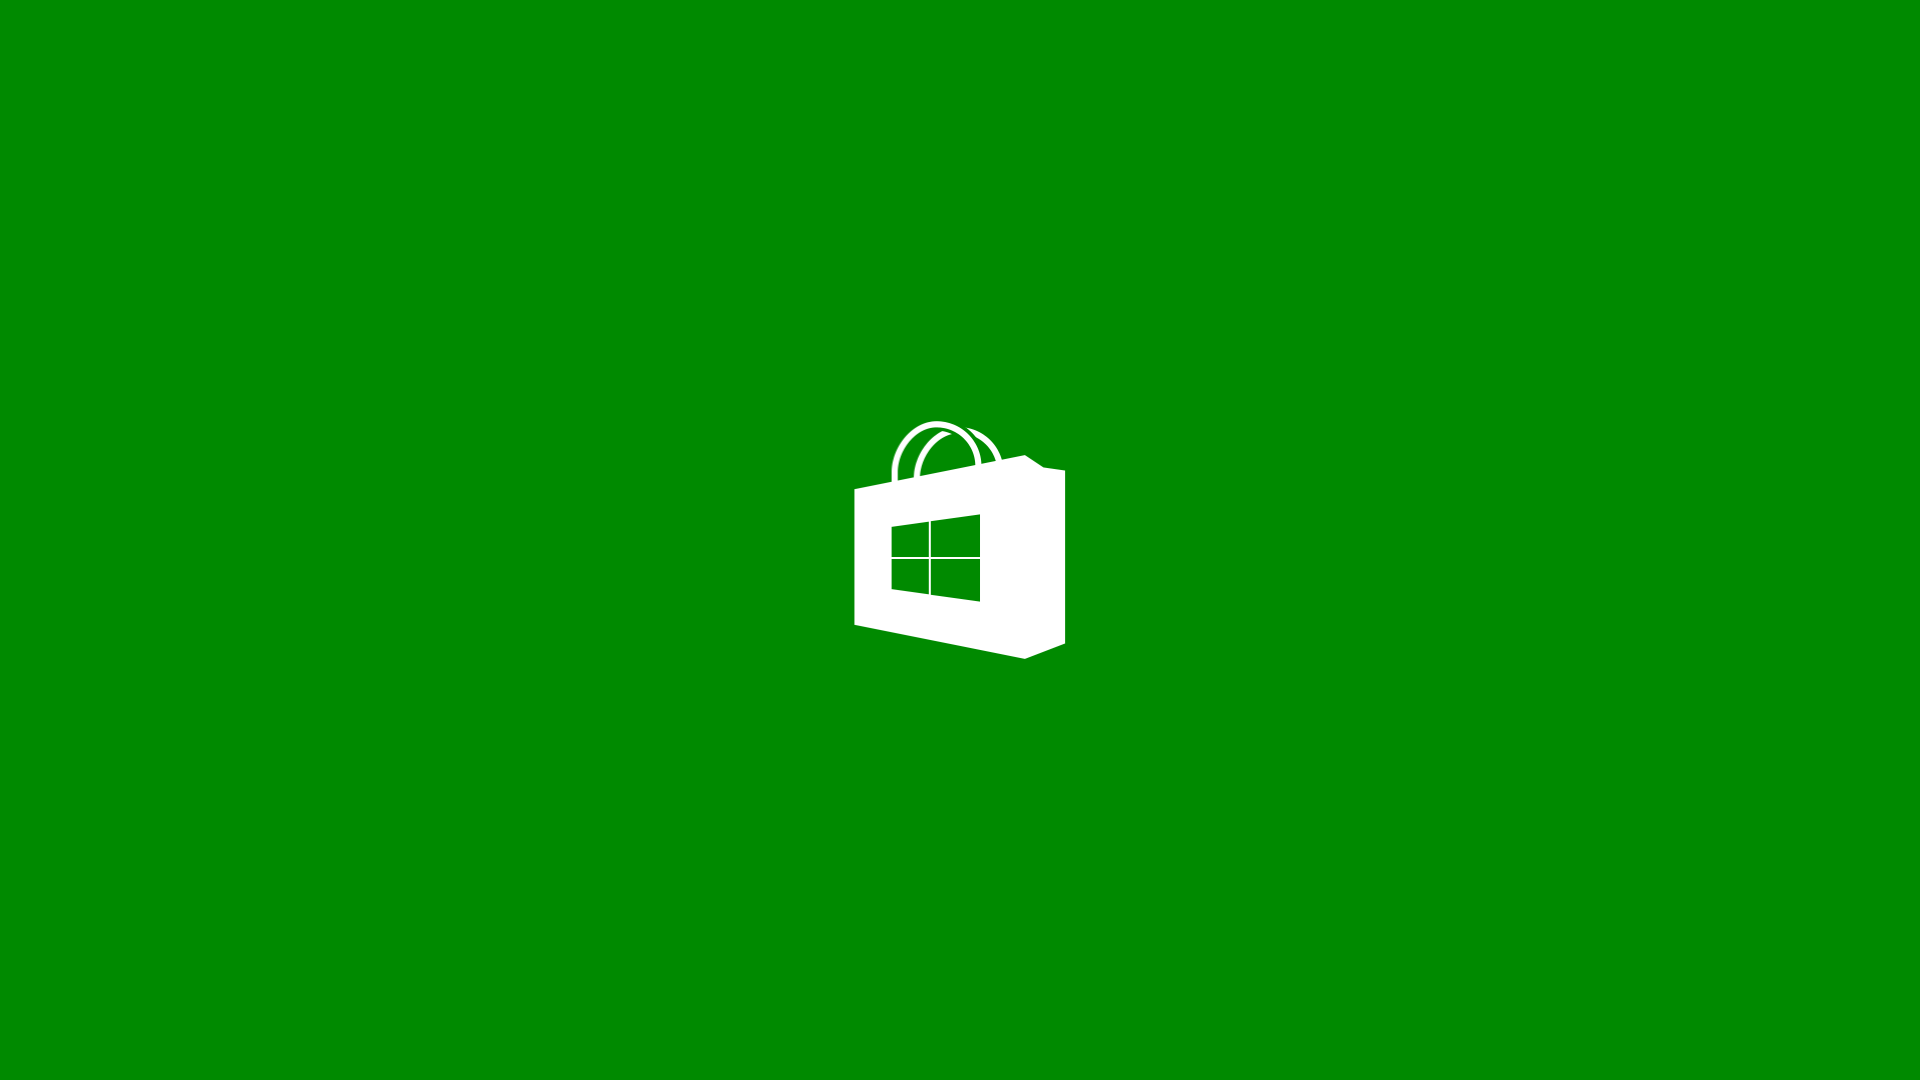 Epic Games is coming to the Microsoft Store